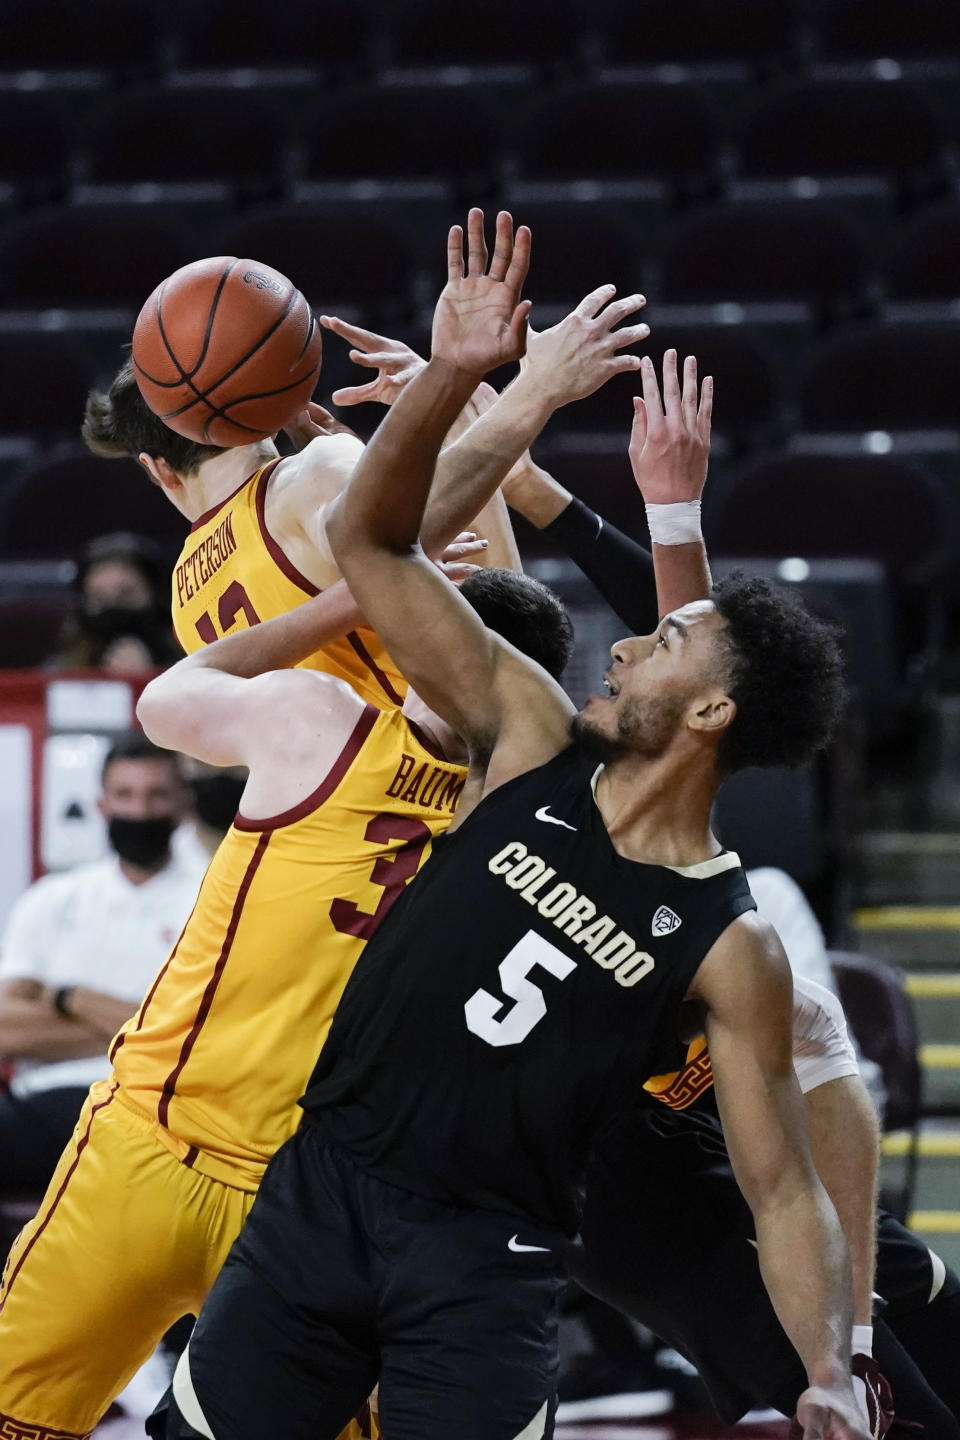 Colorado's D'Shawn Schwartz, front, vies for a rebound with Southern California's Drew Peterson, top left, and Noah Baumann during the first half of an NCAA college basketball game Thursday, Dec. 31, 2020, in Los Angeles. (AP Photo/Jae C. Hong)